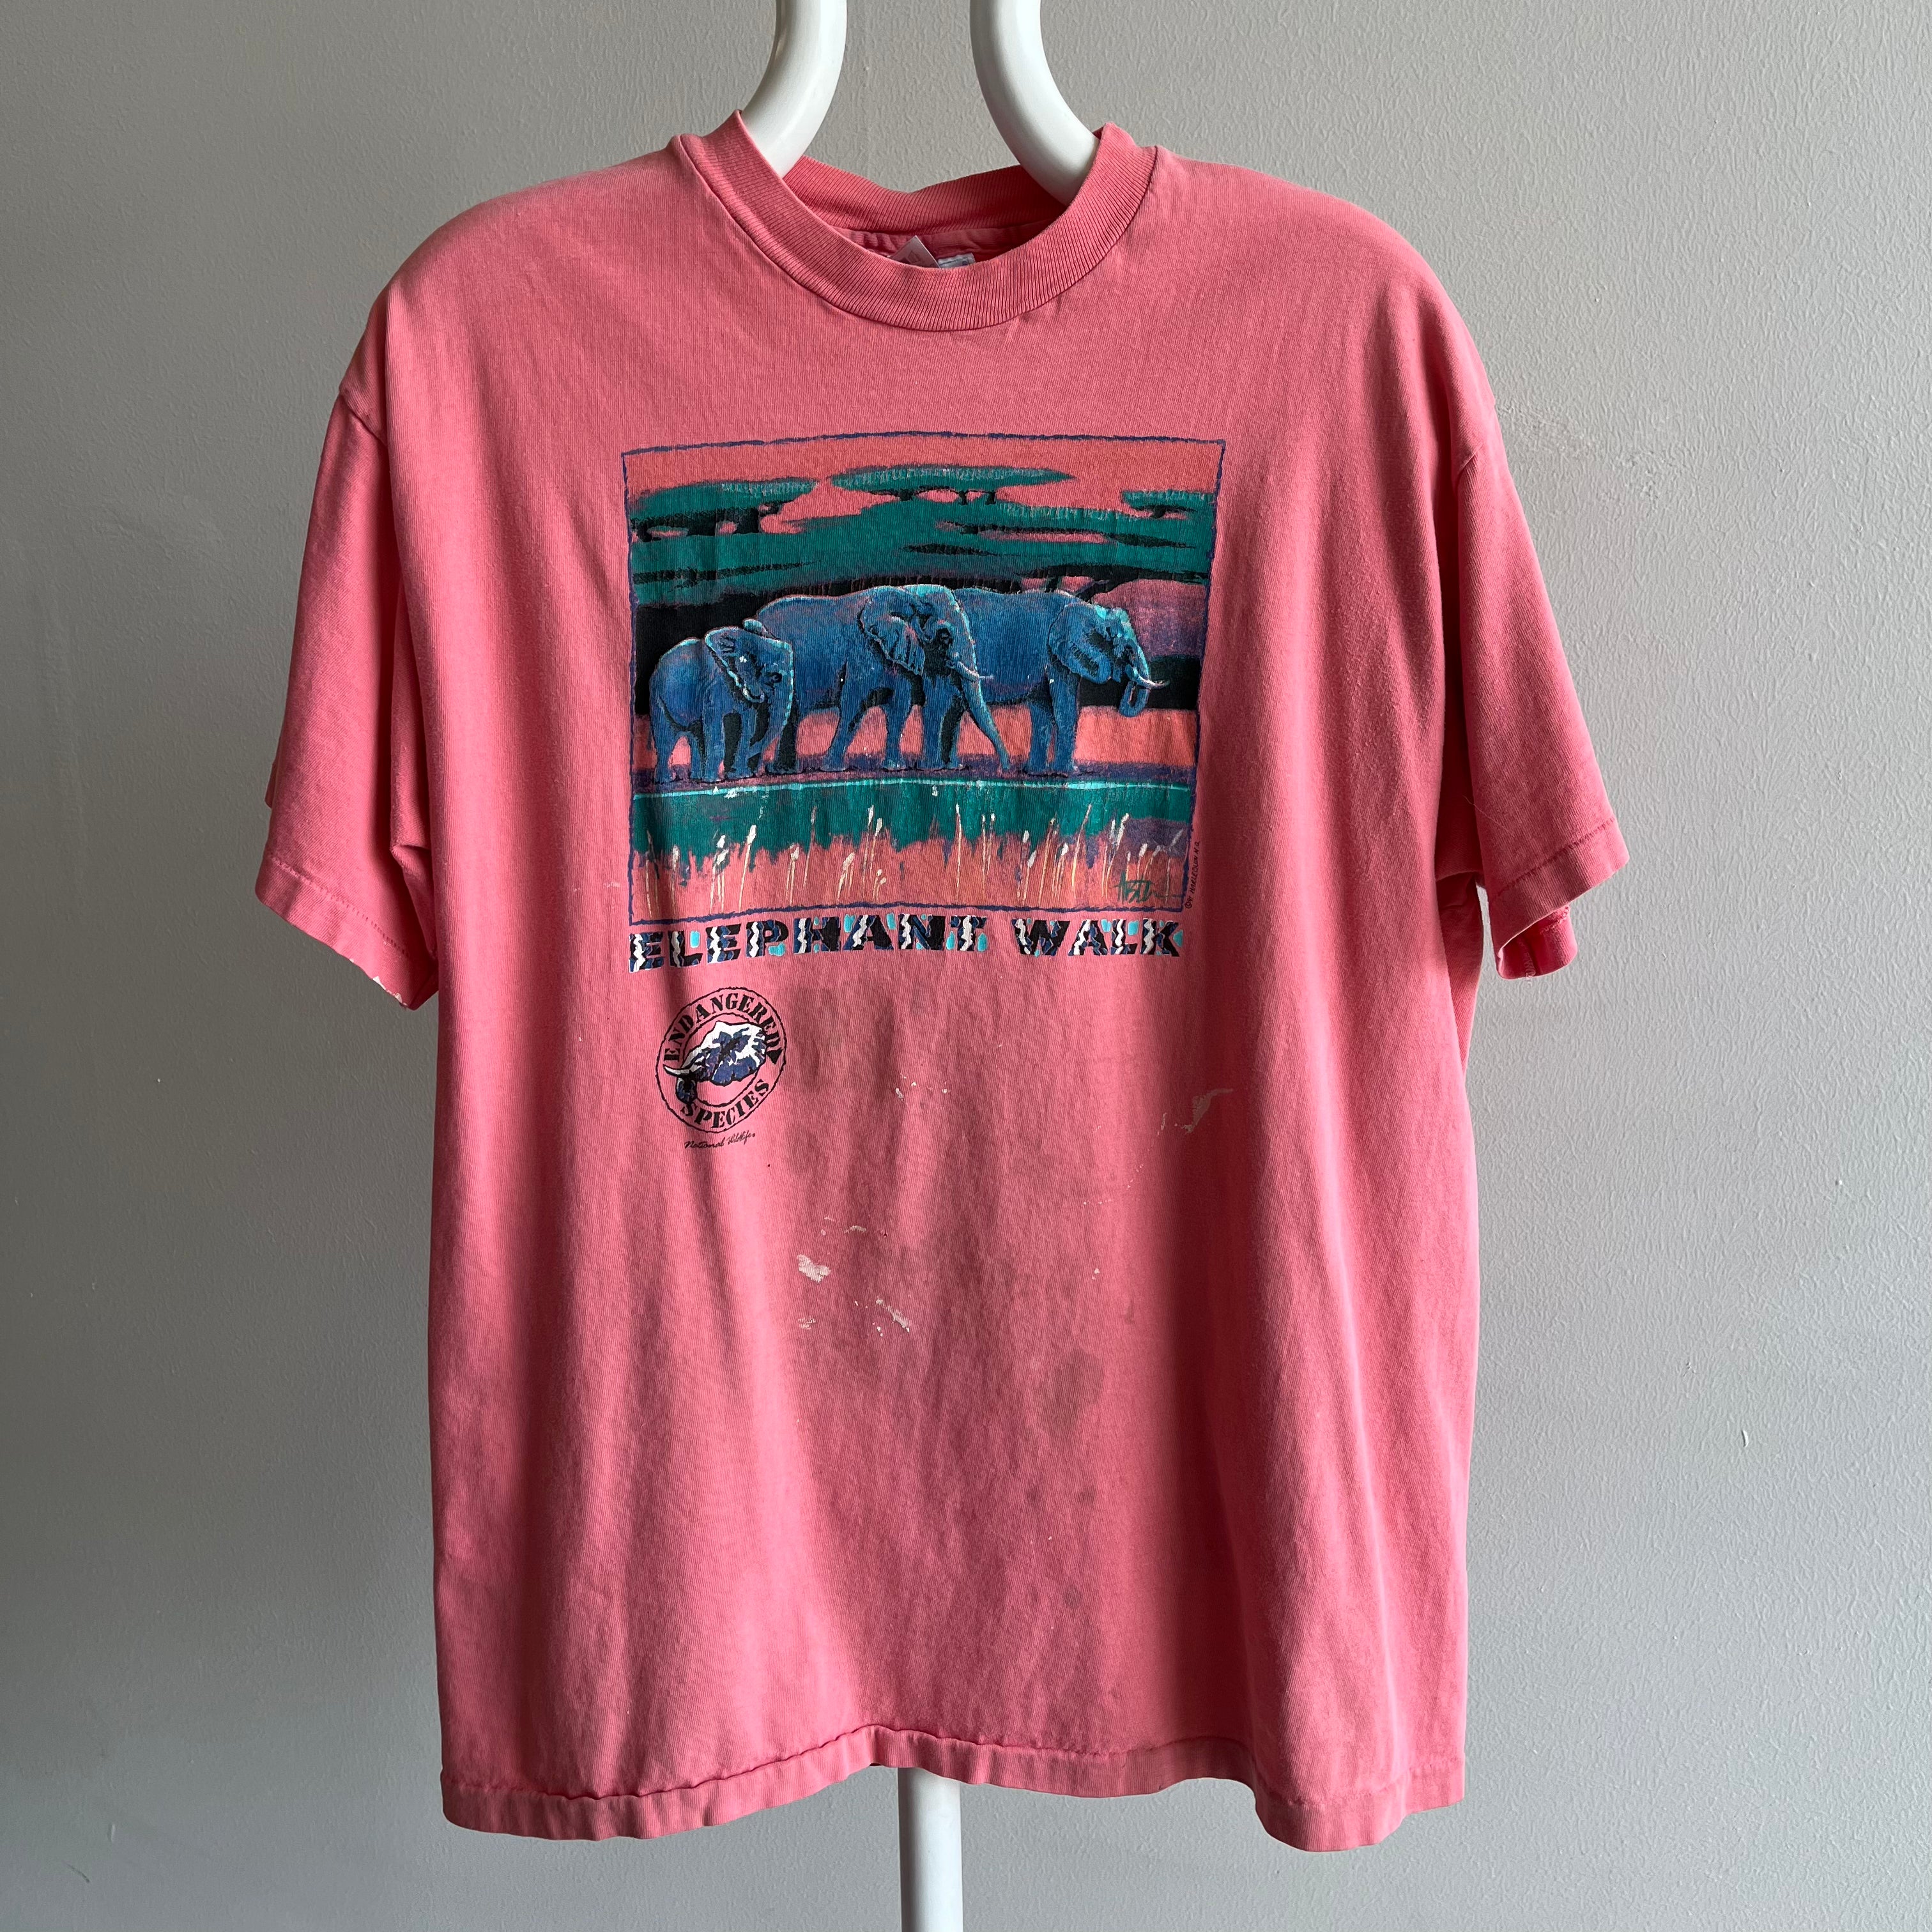 1991 Endangered Species Elephant Walk Super Stained T-Shirt